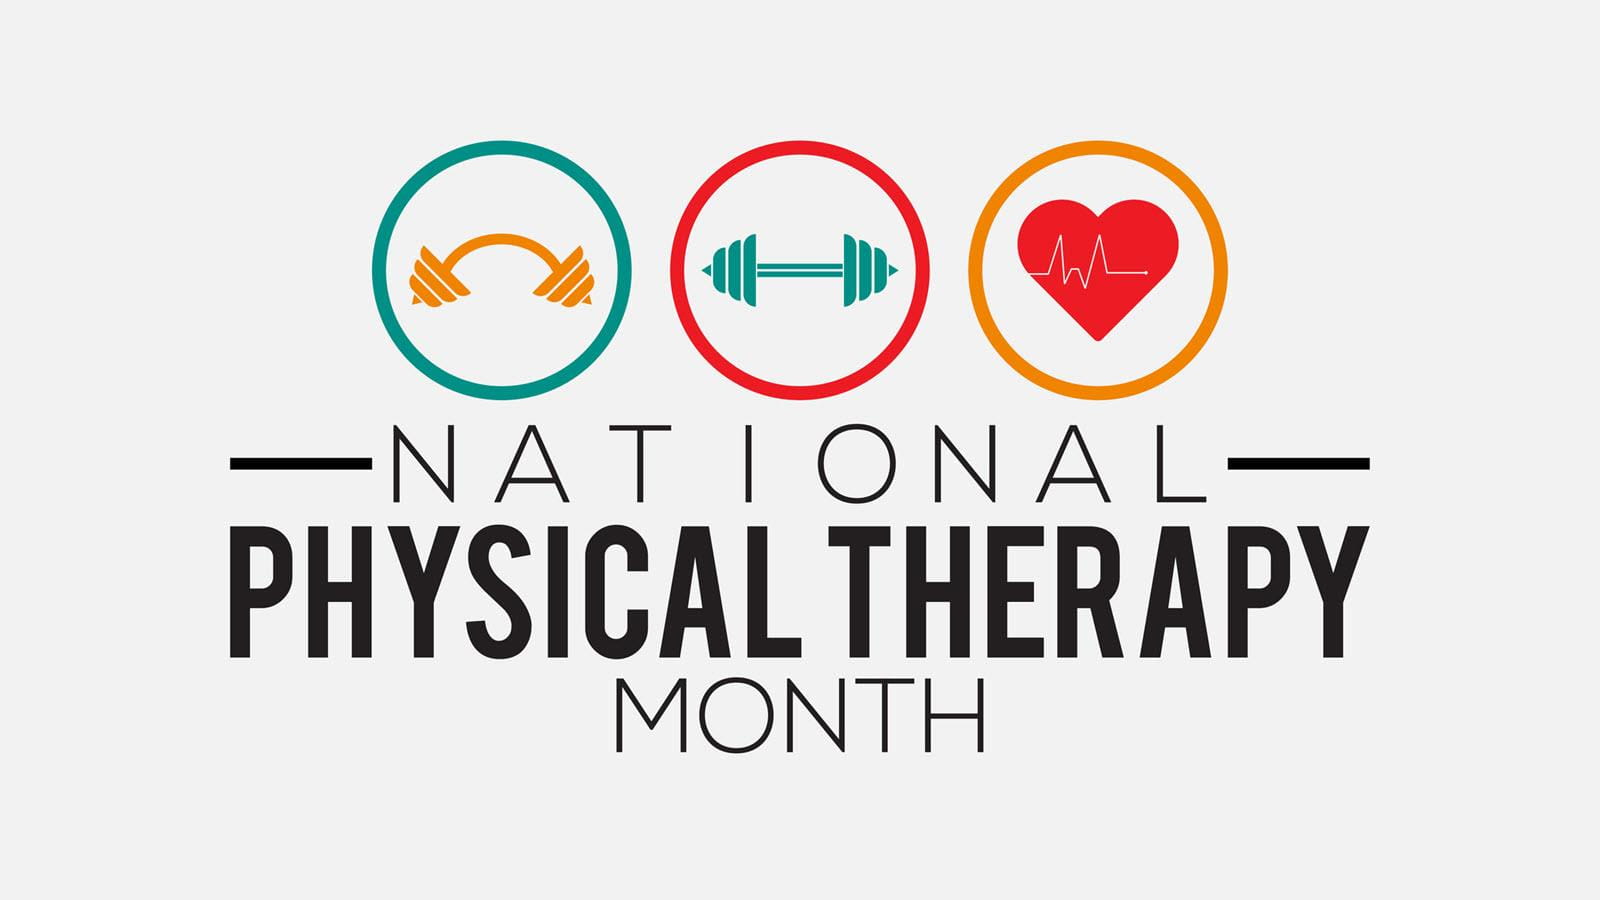 National Physical Therapy Month image featuring barbells and a red heart